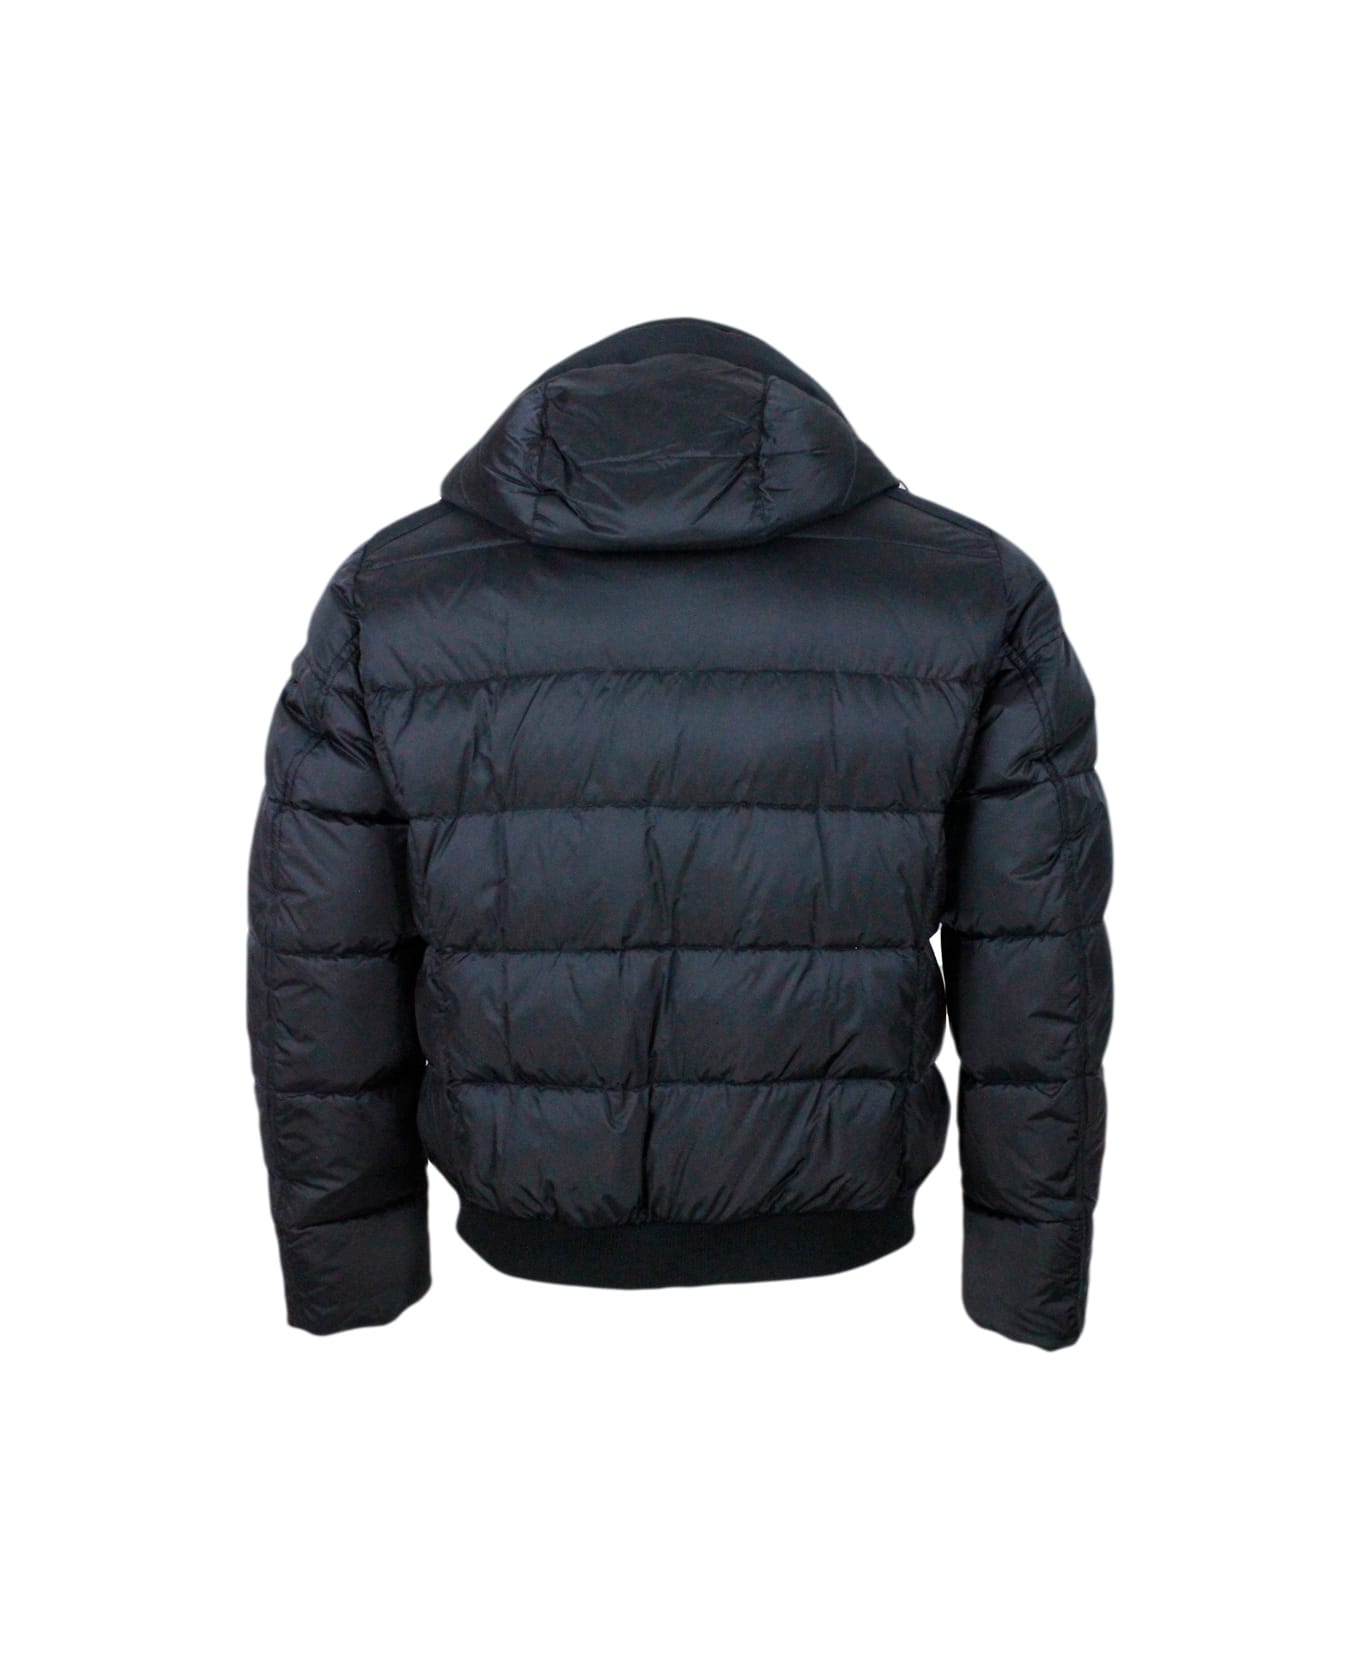 Moorer Bomber Jacket Padded With Goose Feathers With Removable Hood And Collar In Curly Sheepskin, Front And Shoulders In Material, Closure With Zip And Butt - Blu